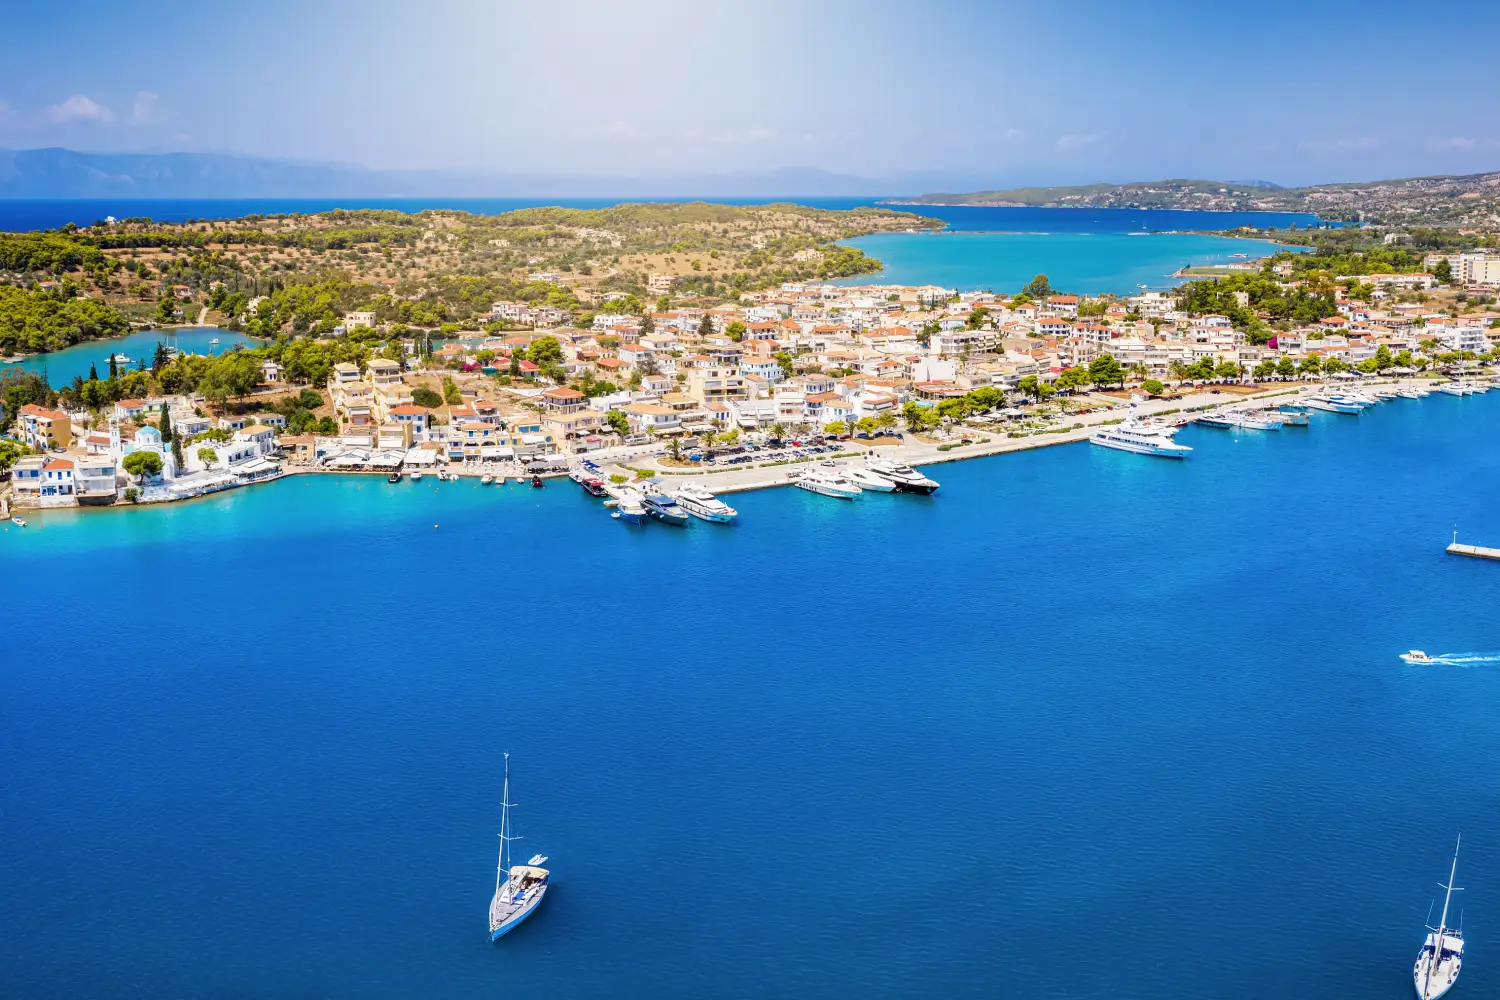 Ferry to Porto Heli - Panoramic view to the city and harbour of Porto Cheli, the cosmopolitian vacation hotspot on the peninsula of Peleponnese, Greece.